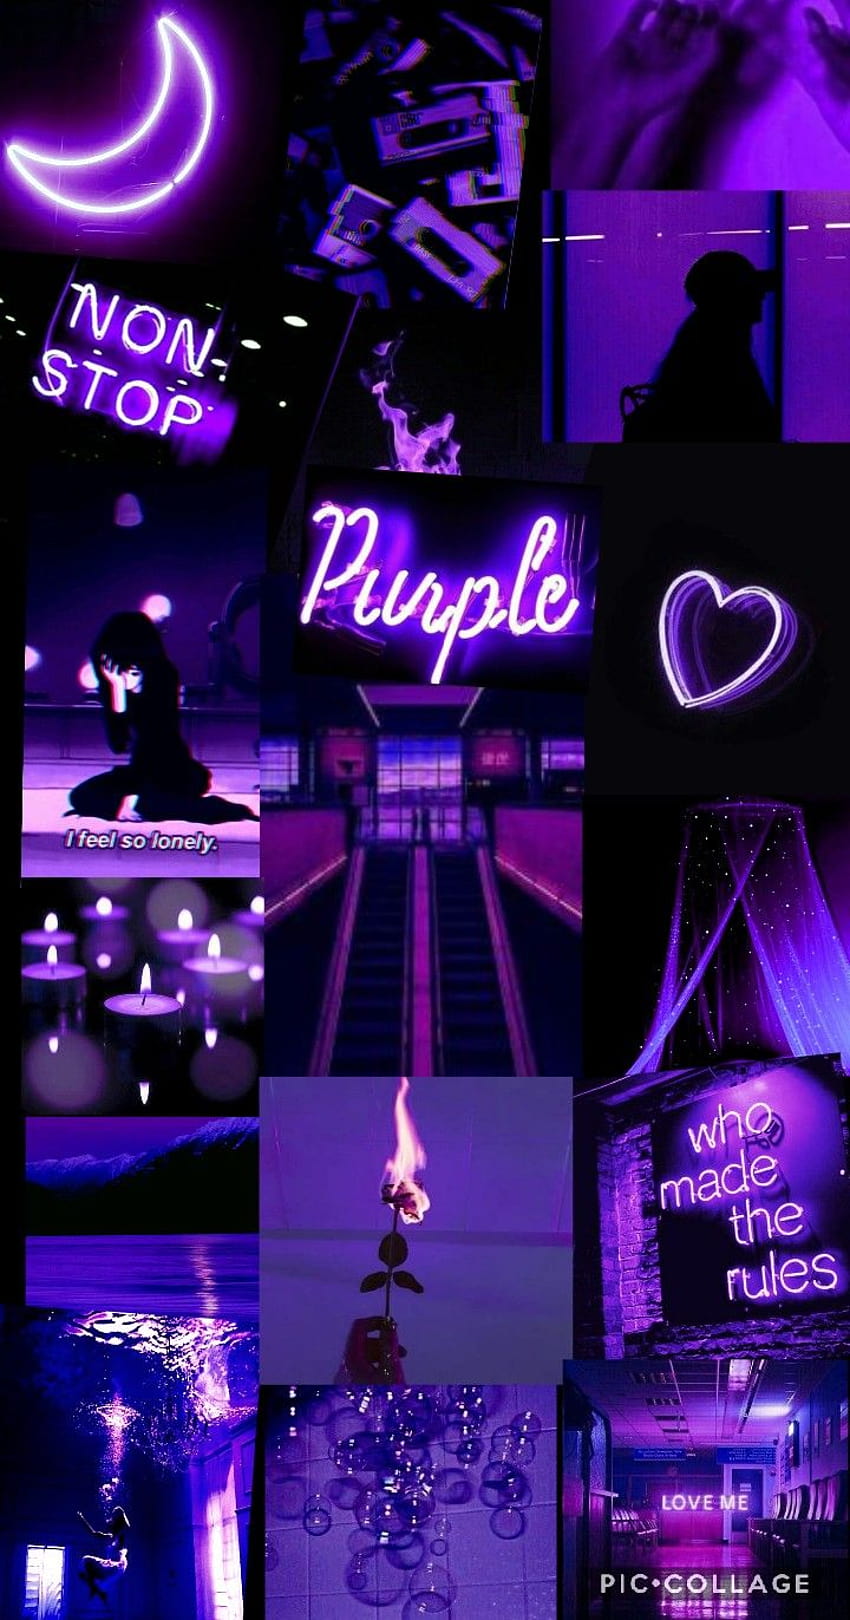 A collage of purple neon lights and words - Purple, neon purple